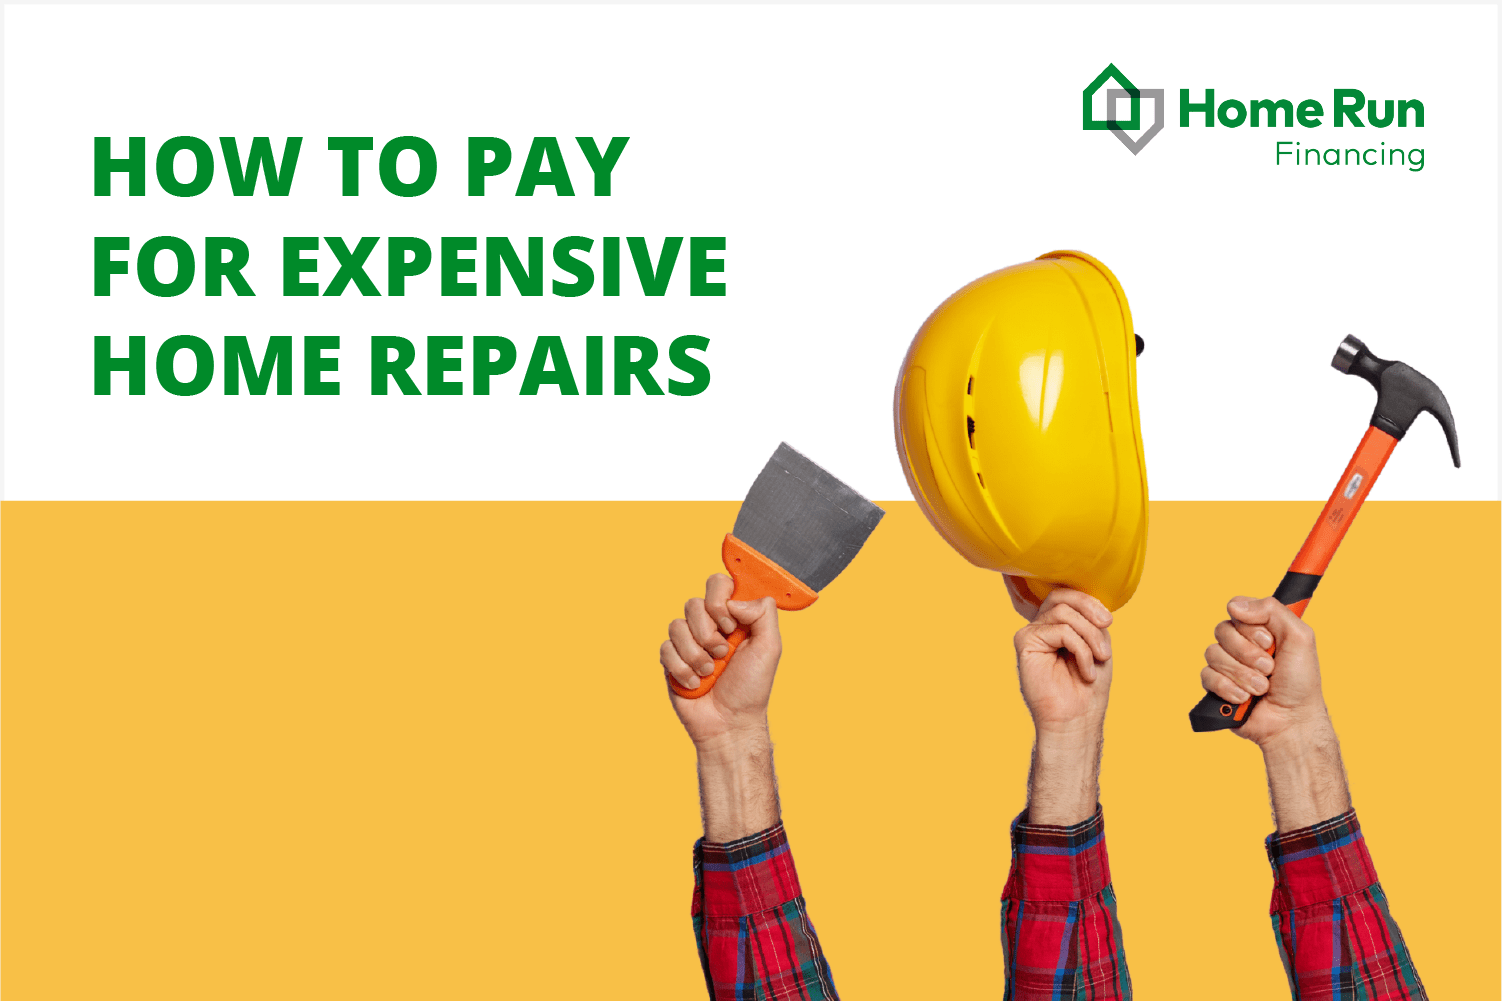 How to pay for expensive home repairs